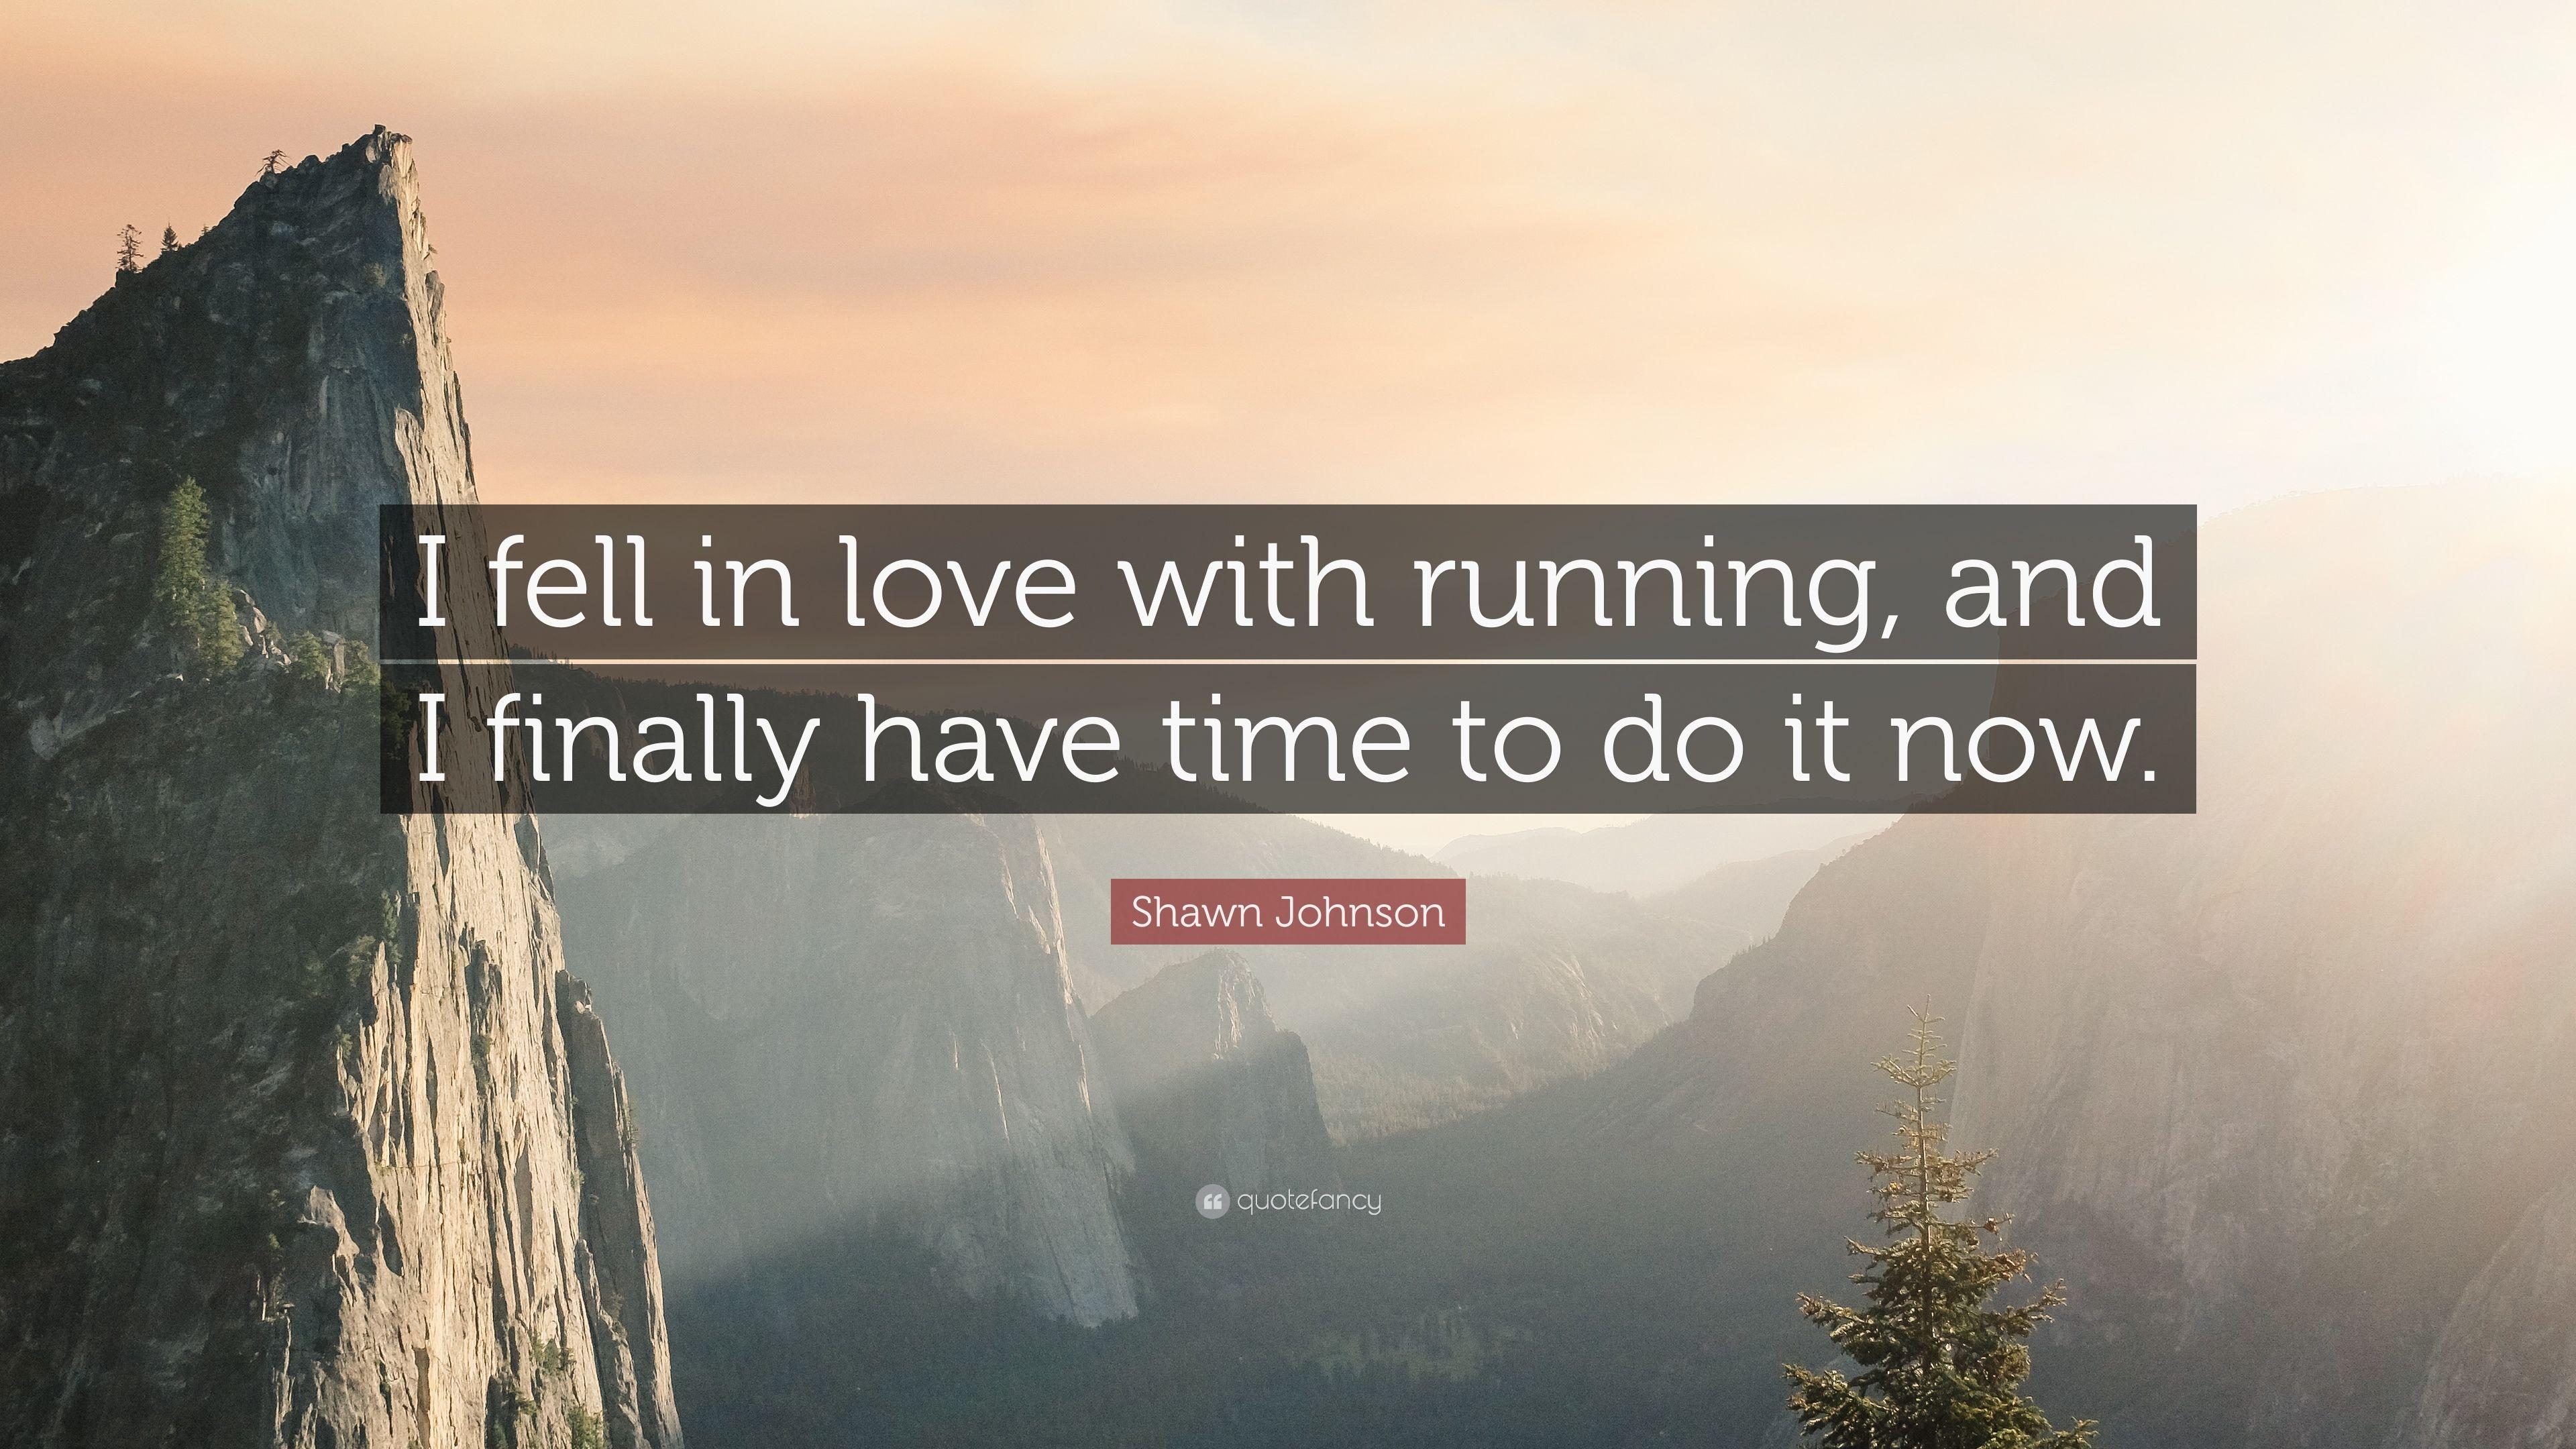 Shawn Johnson Quote: “I fell in love with running, and I finally